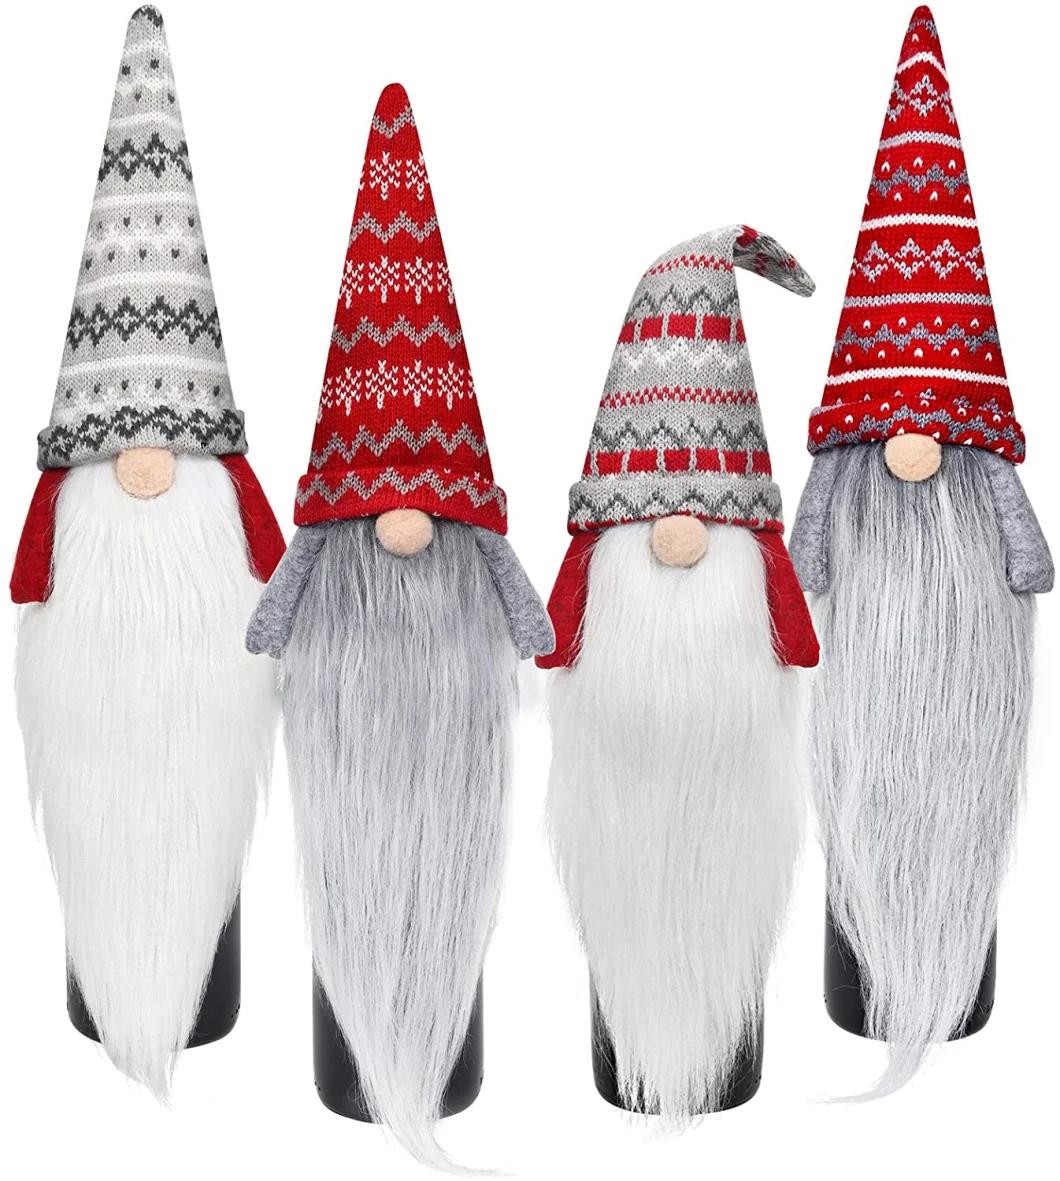 Holiday/Christmas Wine Bottle Cover, Set of 7: Checkers & Herringbone Decors with Faux Fur Collar; Santa Clause, Snowman & Reindeer Drawstring Bags; Bottle